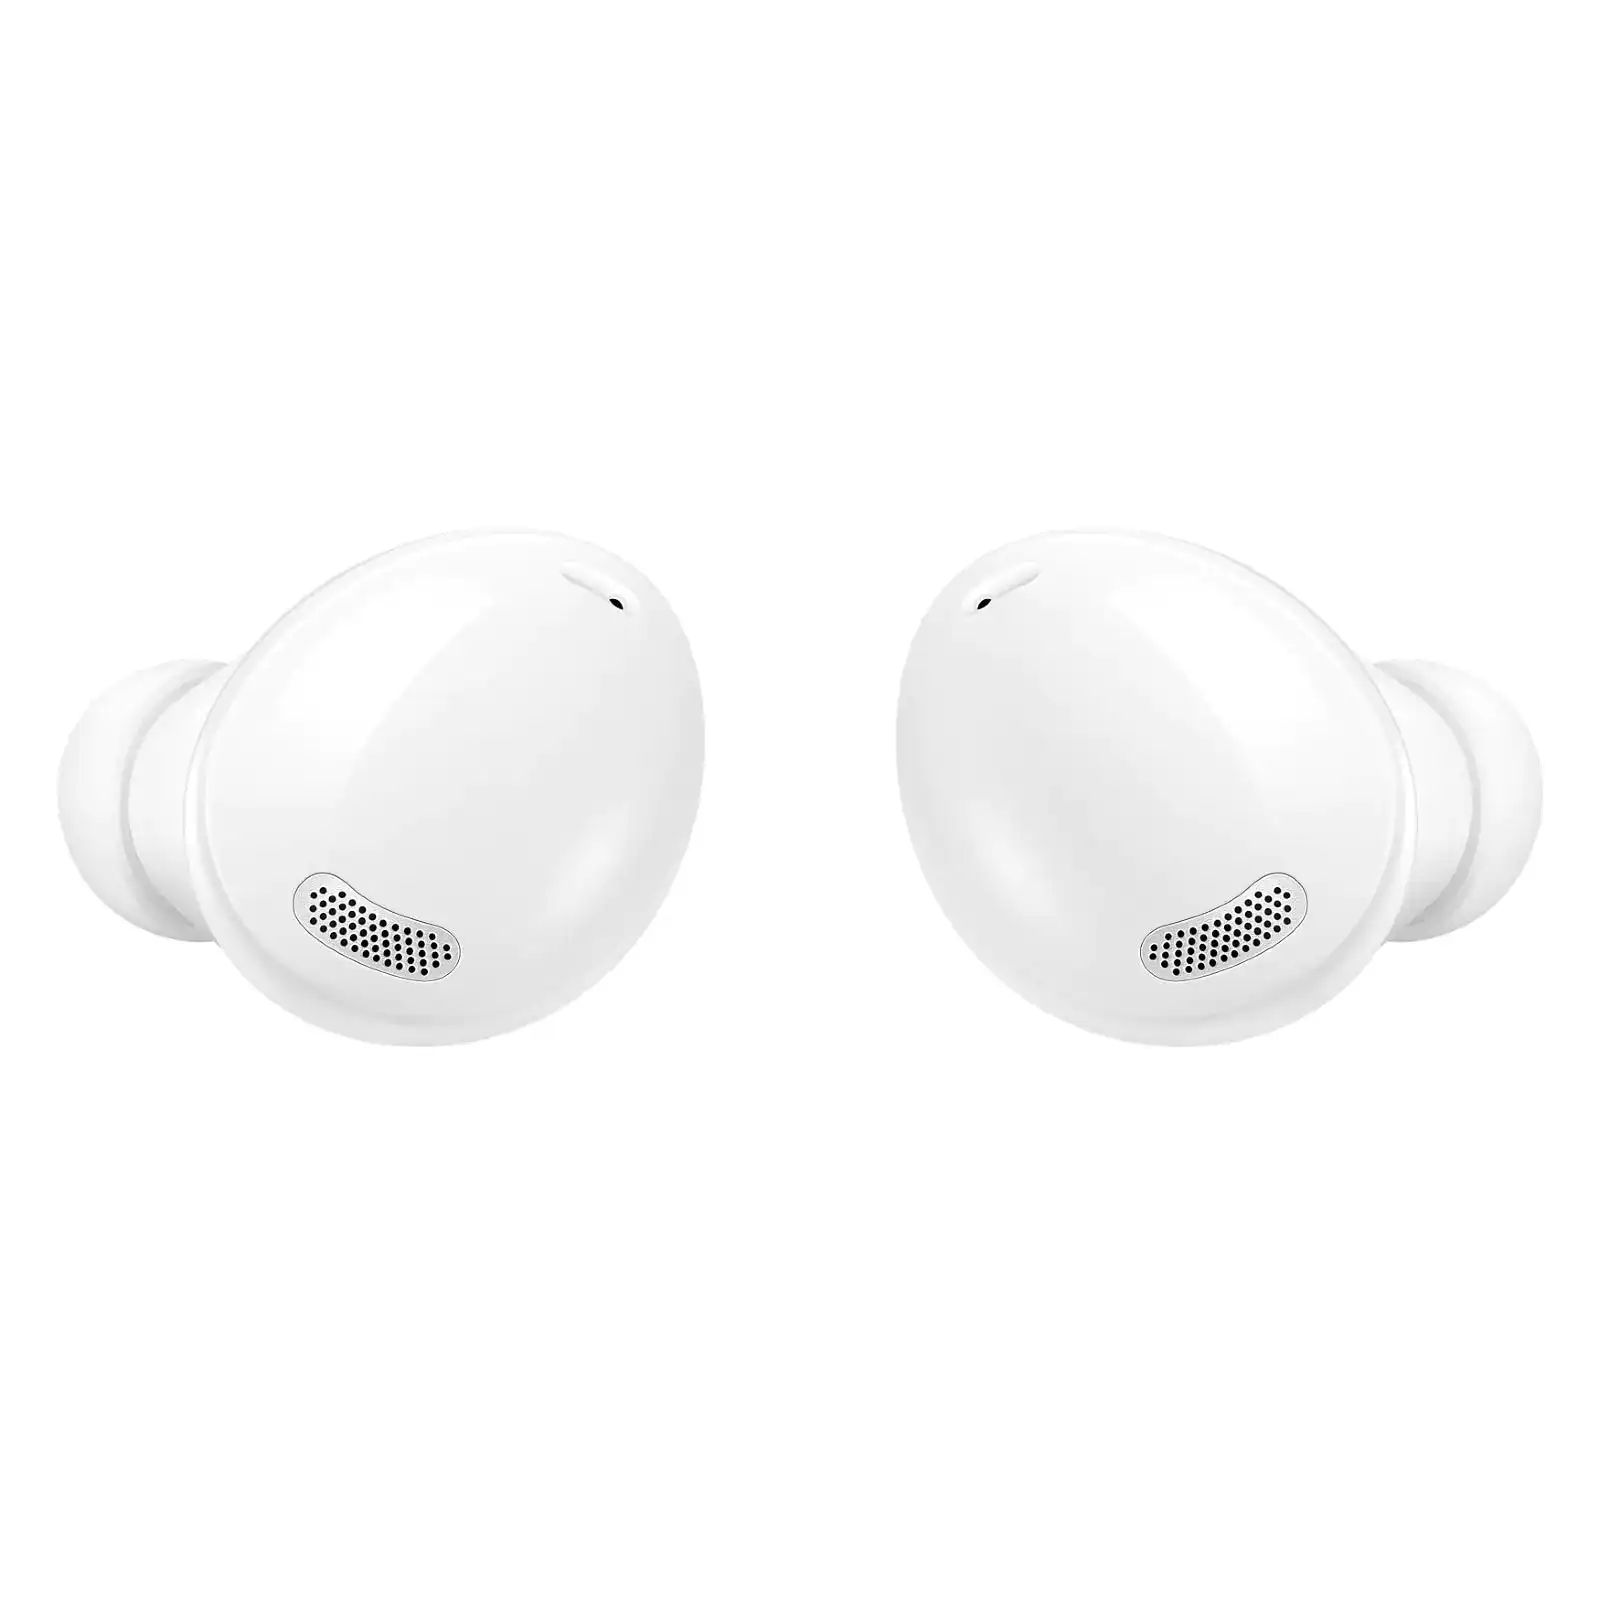 Samsung Galaxy Buds Pro R190 (Phantom White) Anc Smart Active Noise Cancellation Long Battery Life